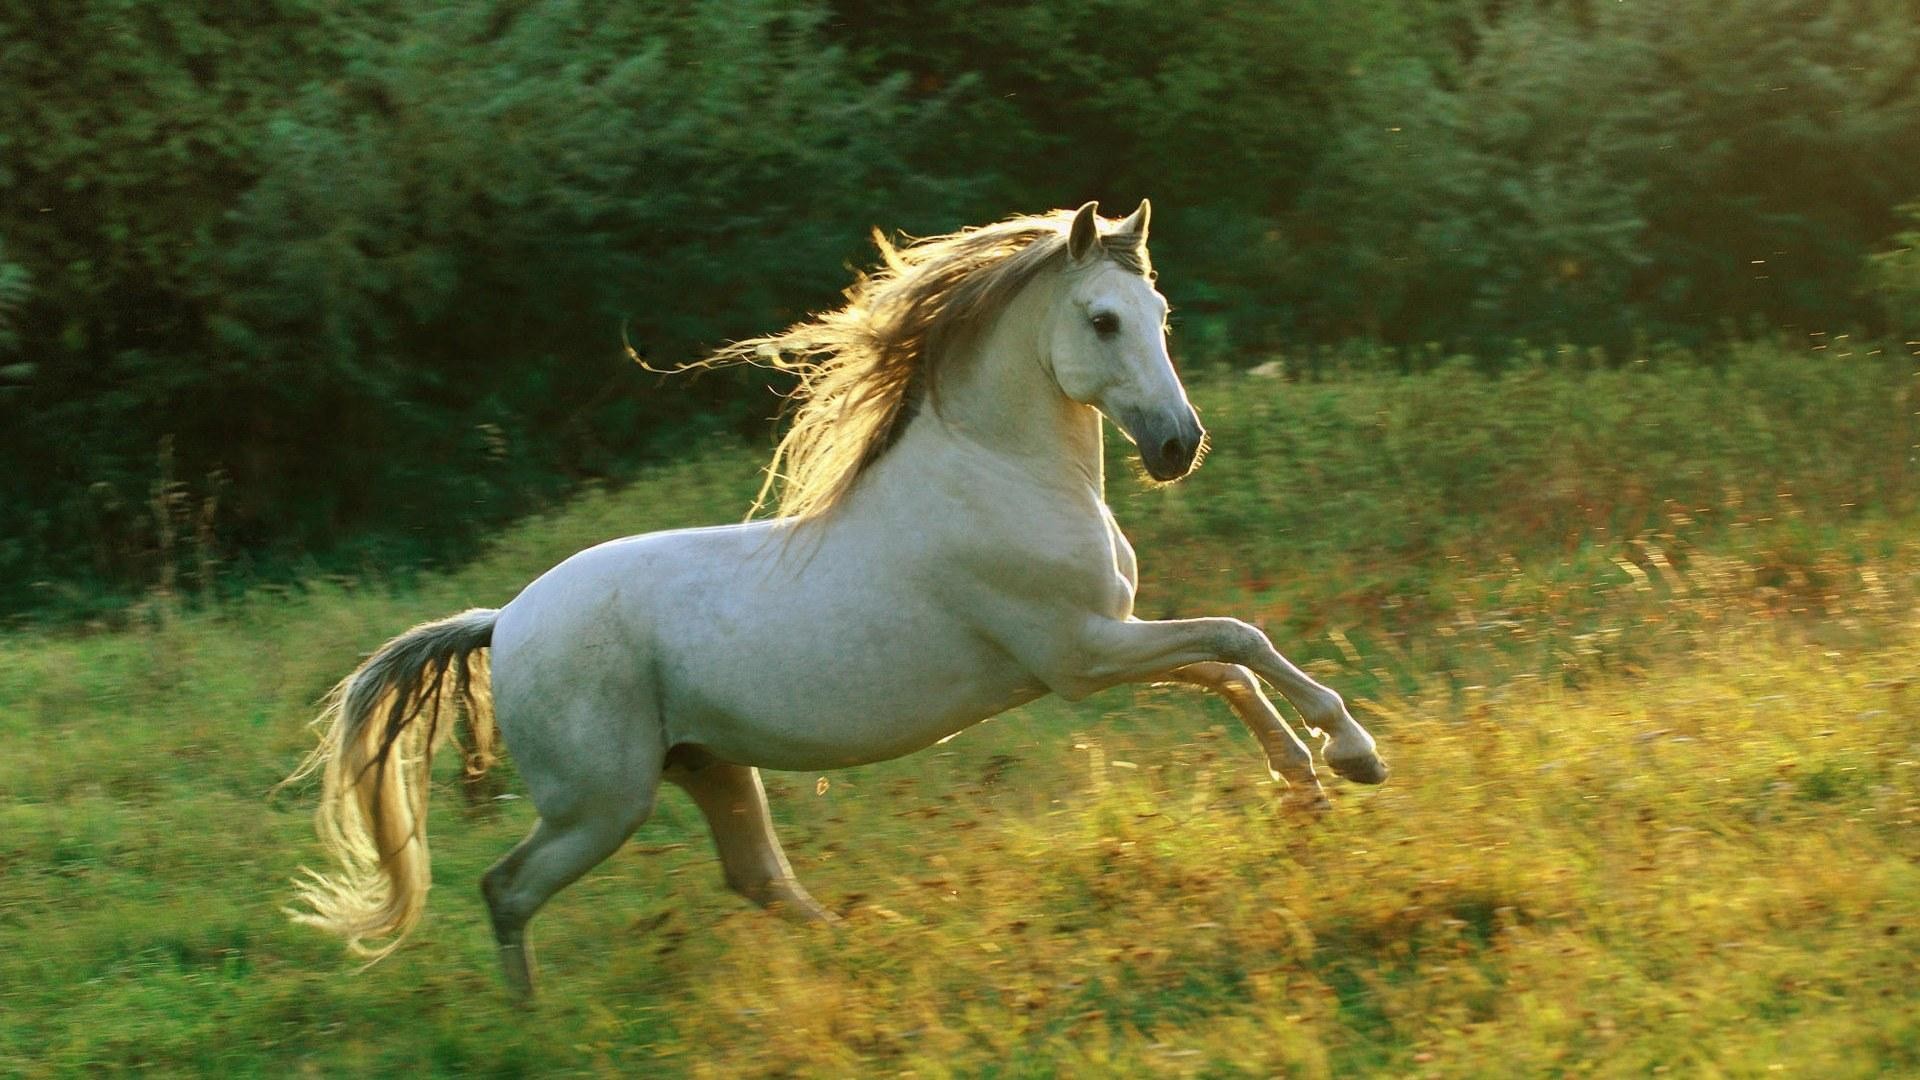 1920x1080 horse wallpapers category of free hd wallpapers horse screensavers is .